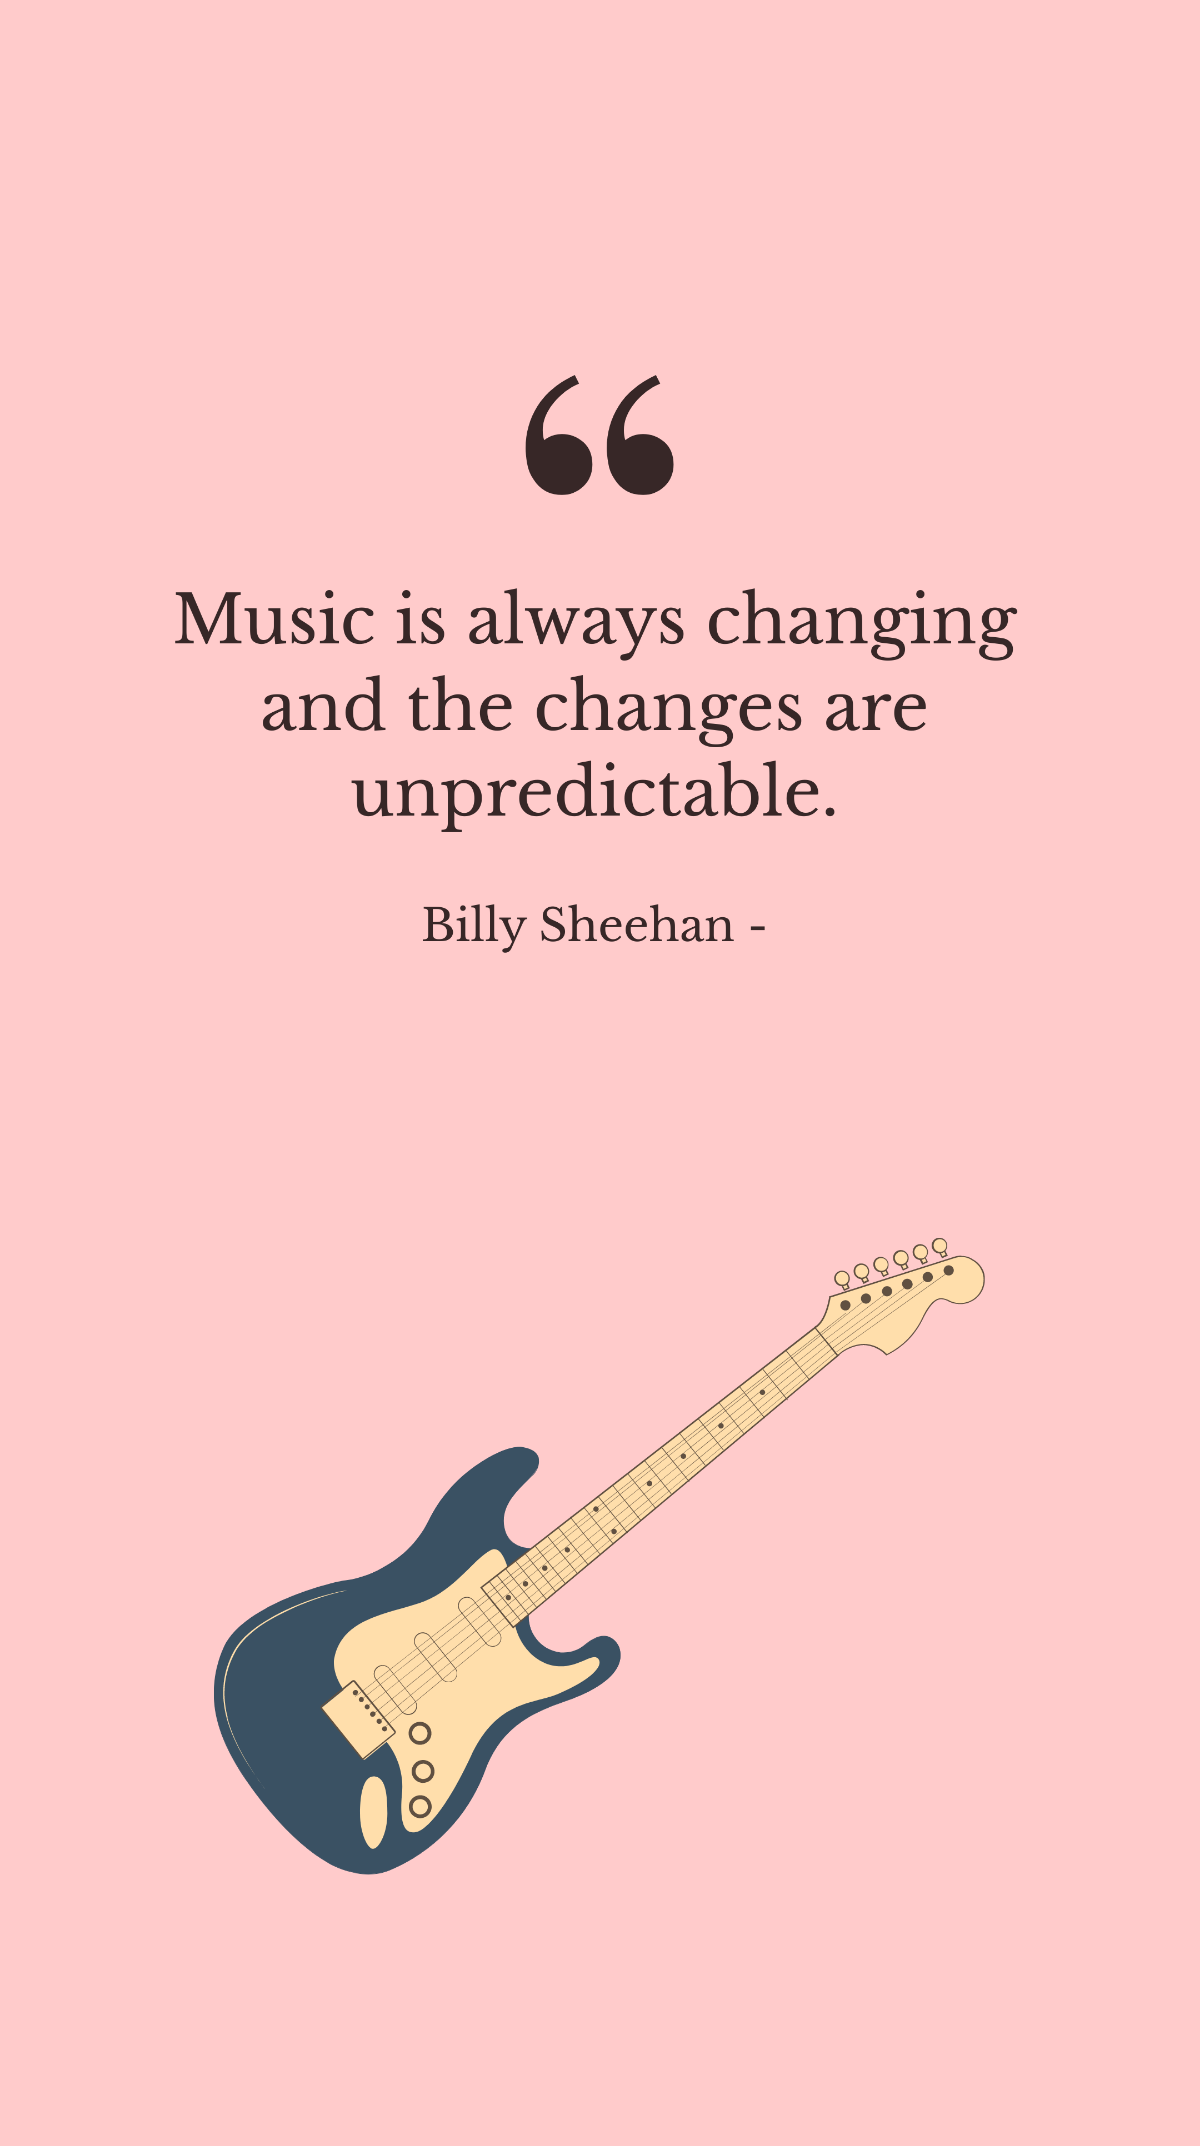 Billy Sheehan - Music is always changing and the changes are unpredictable.